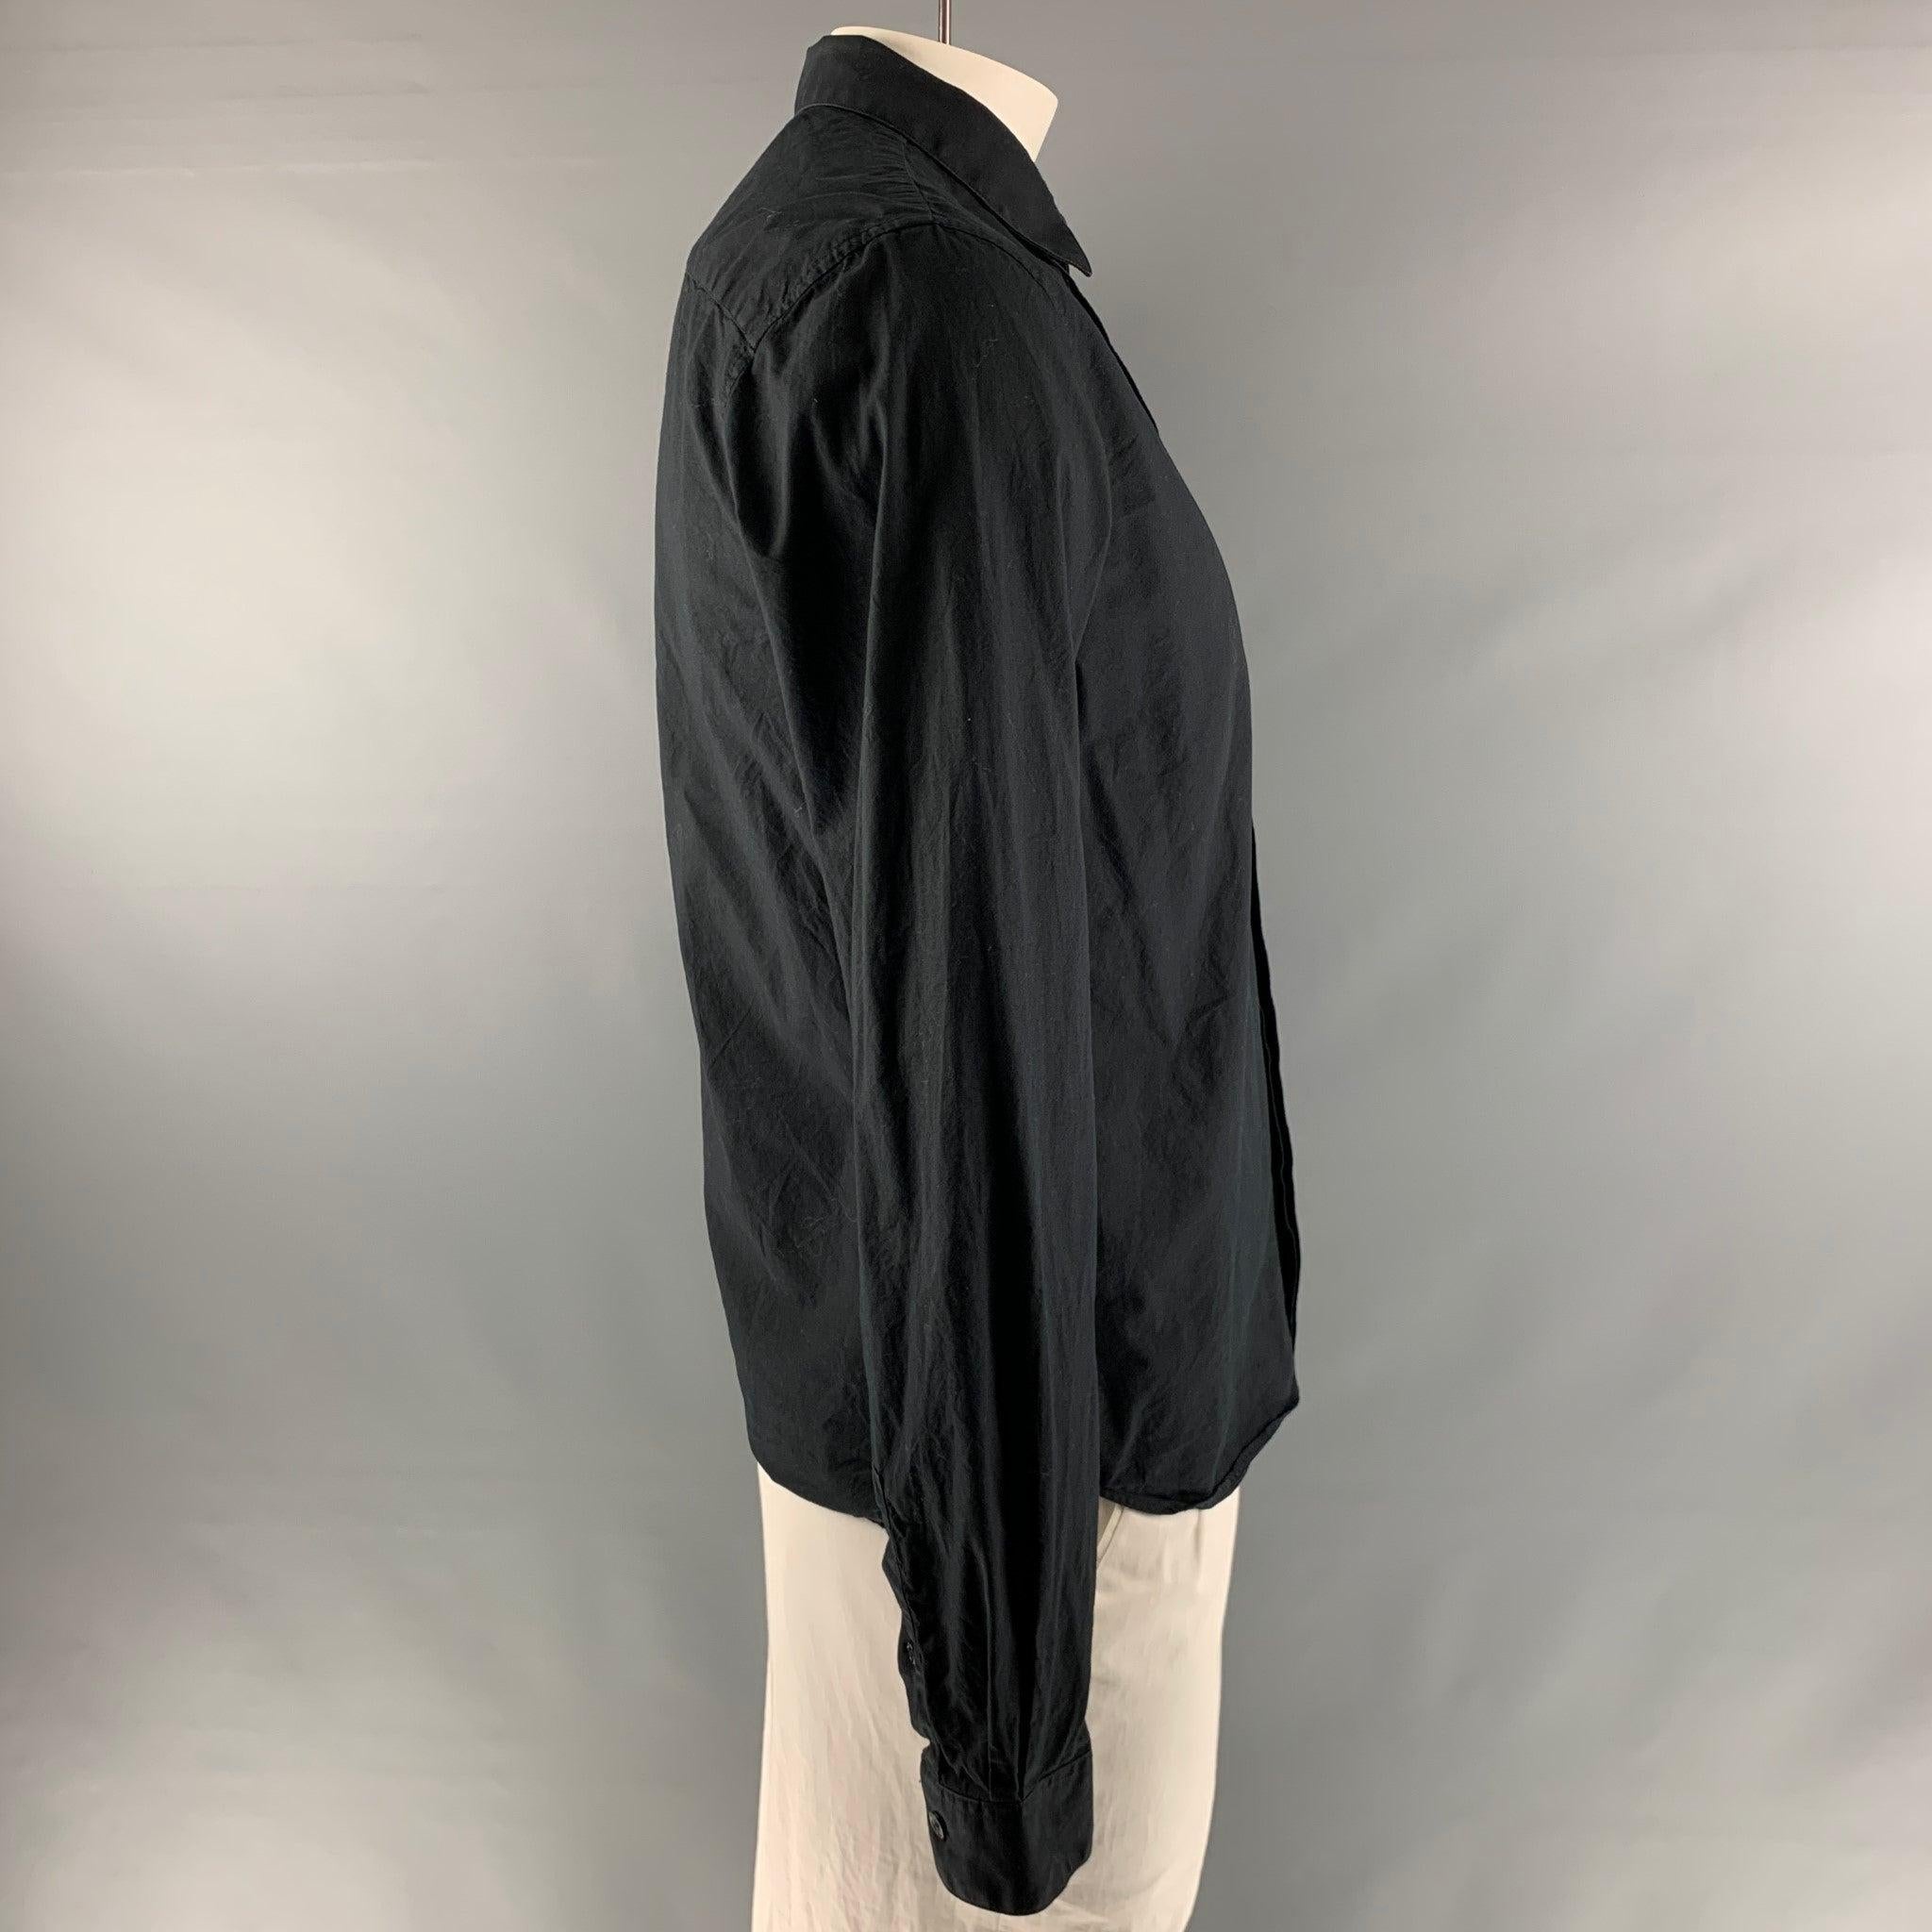 THE KOOPLES long sleeve shirt comes in a black cotton , featuring a slim fit, straight collar, and a hidden placket closure.Very Good Pre-Owned Condition. 

Marked:   L 

Measurements: 
 
Shoulder: 19 inches Chest: 42 inches Sleeve: 25 inches